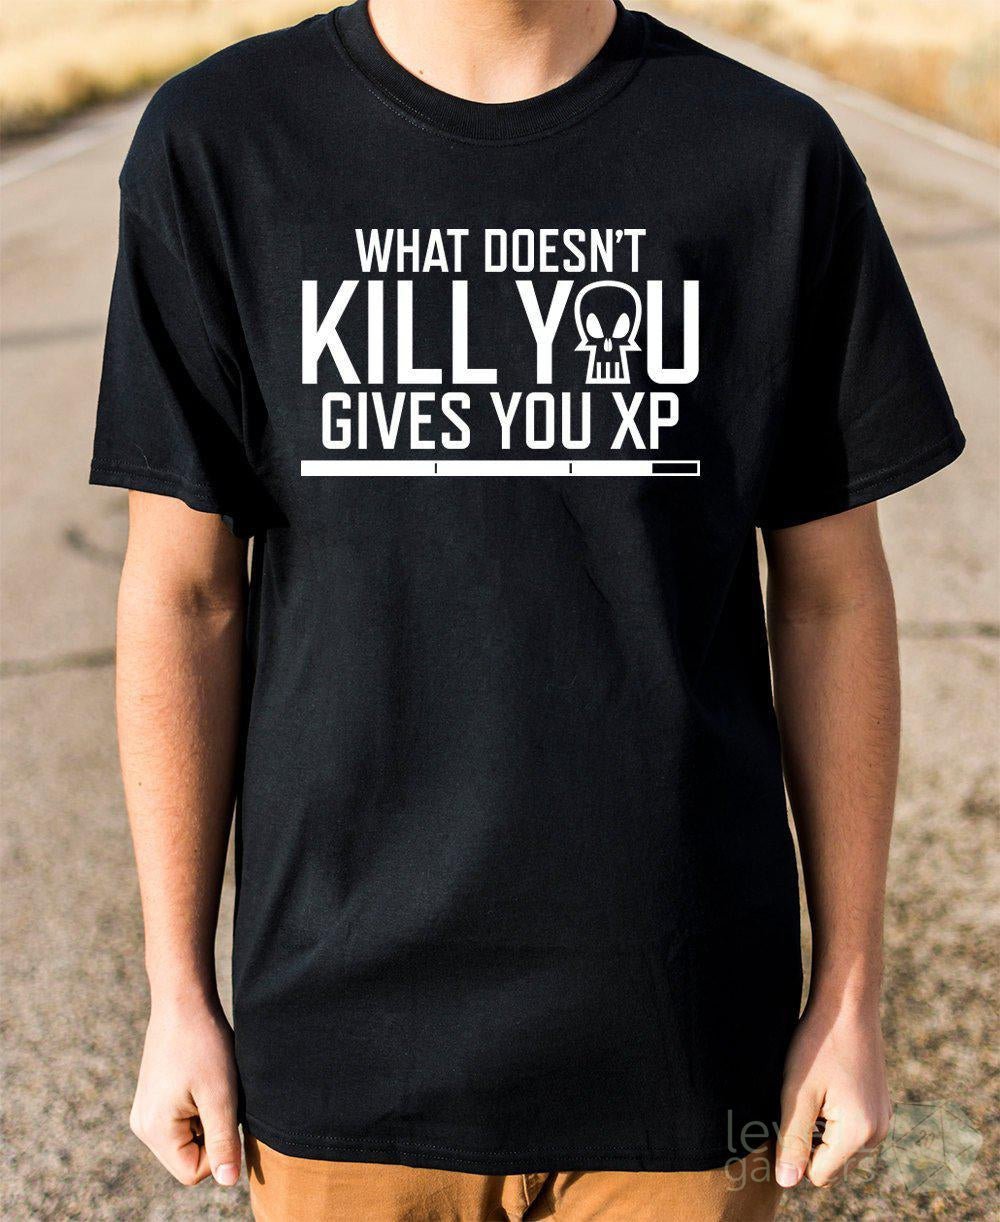 What Doesn't Kill You Gives You XP T-Shirt  Level 1 Gamers   